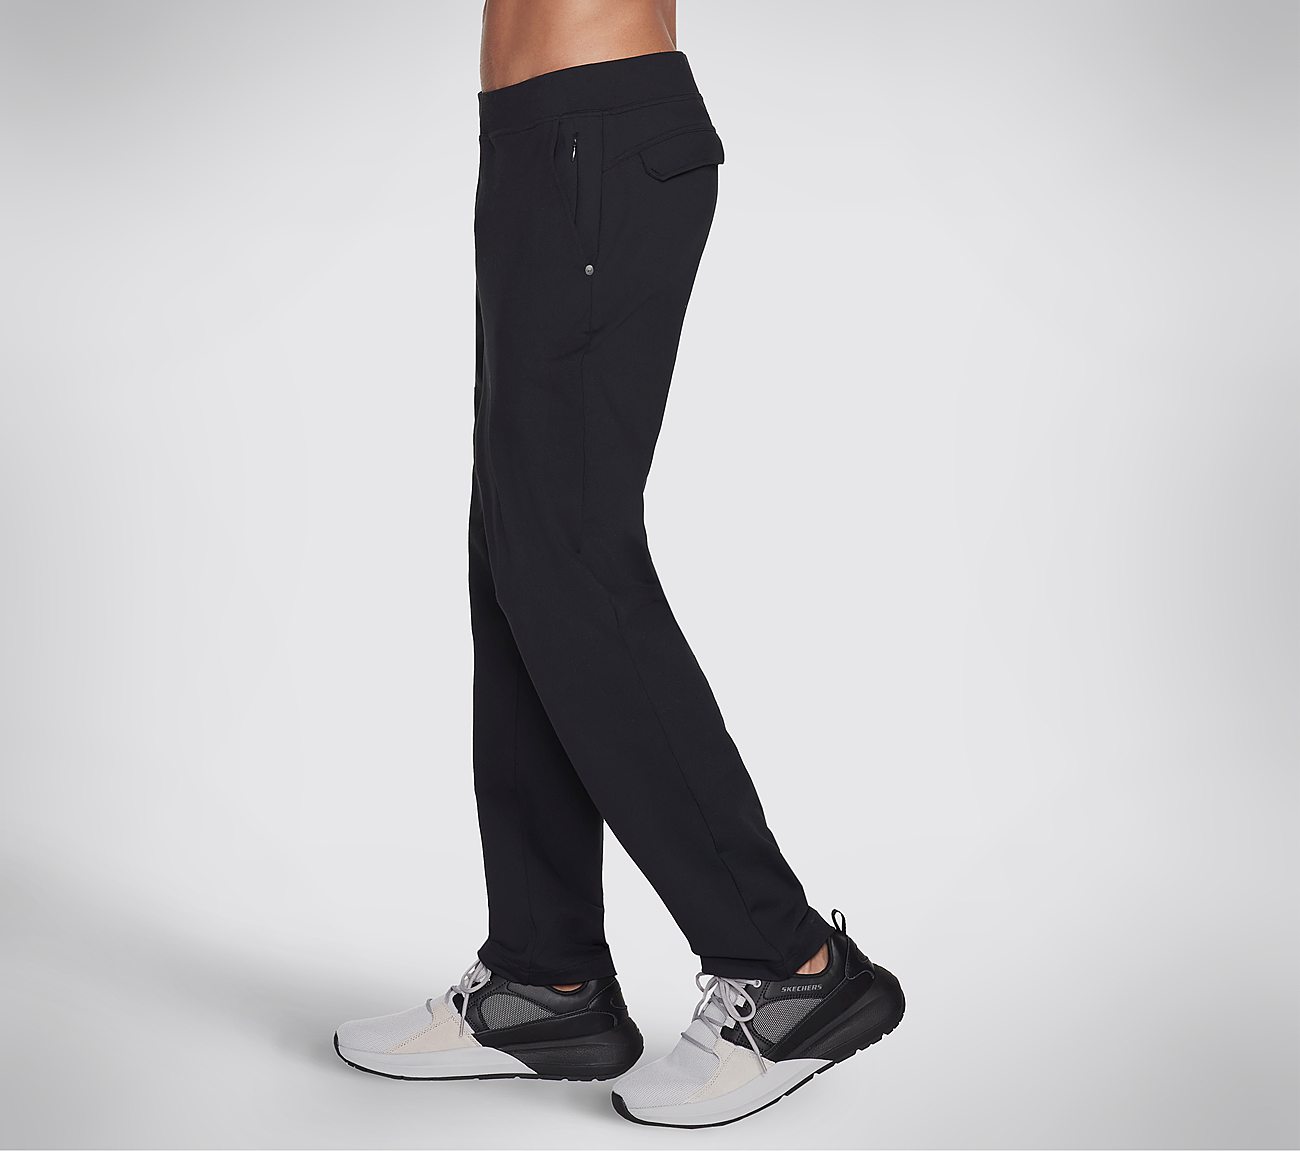 THE GOWALK PANT RECHARGE, BBBBLACK Apparels Bottom View